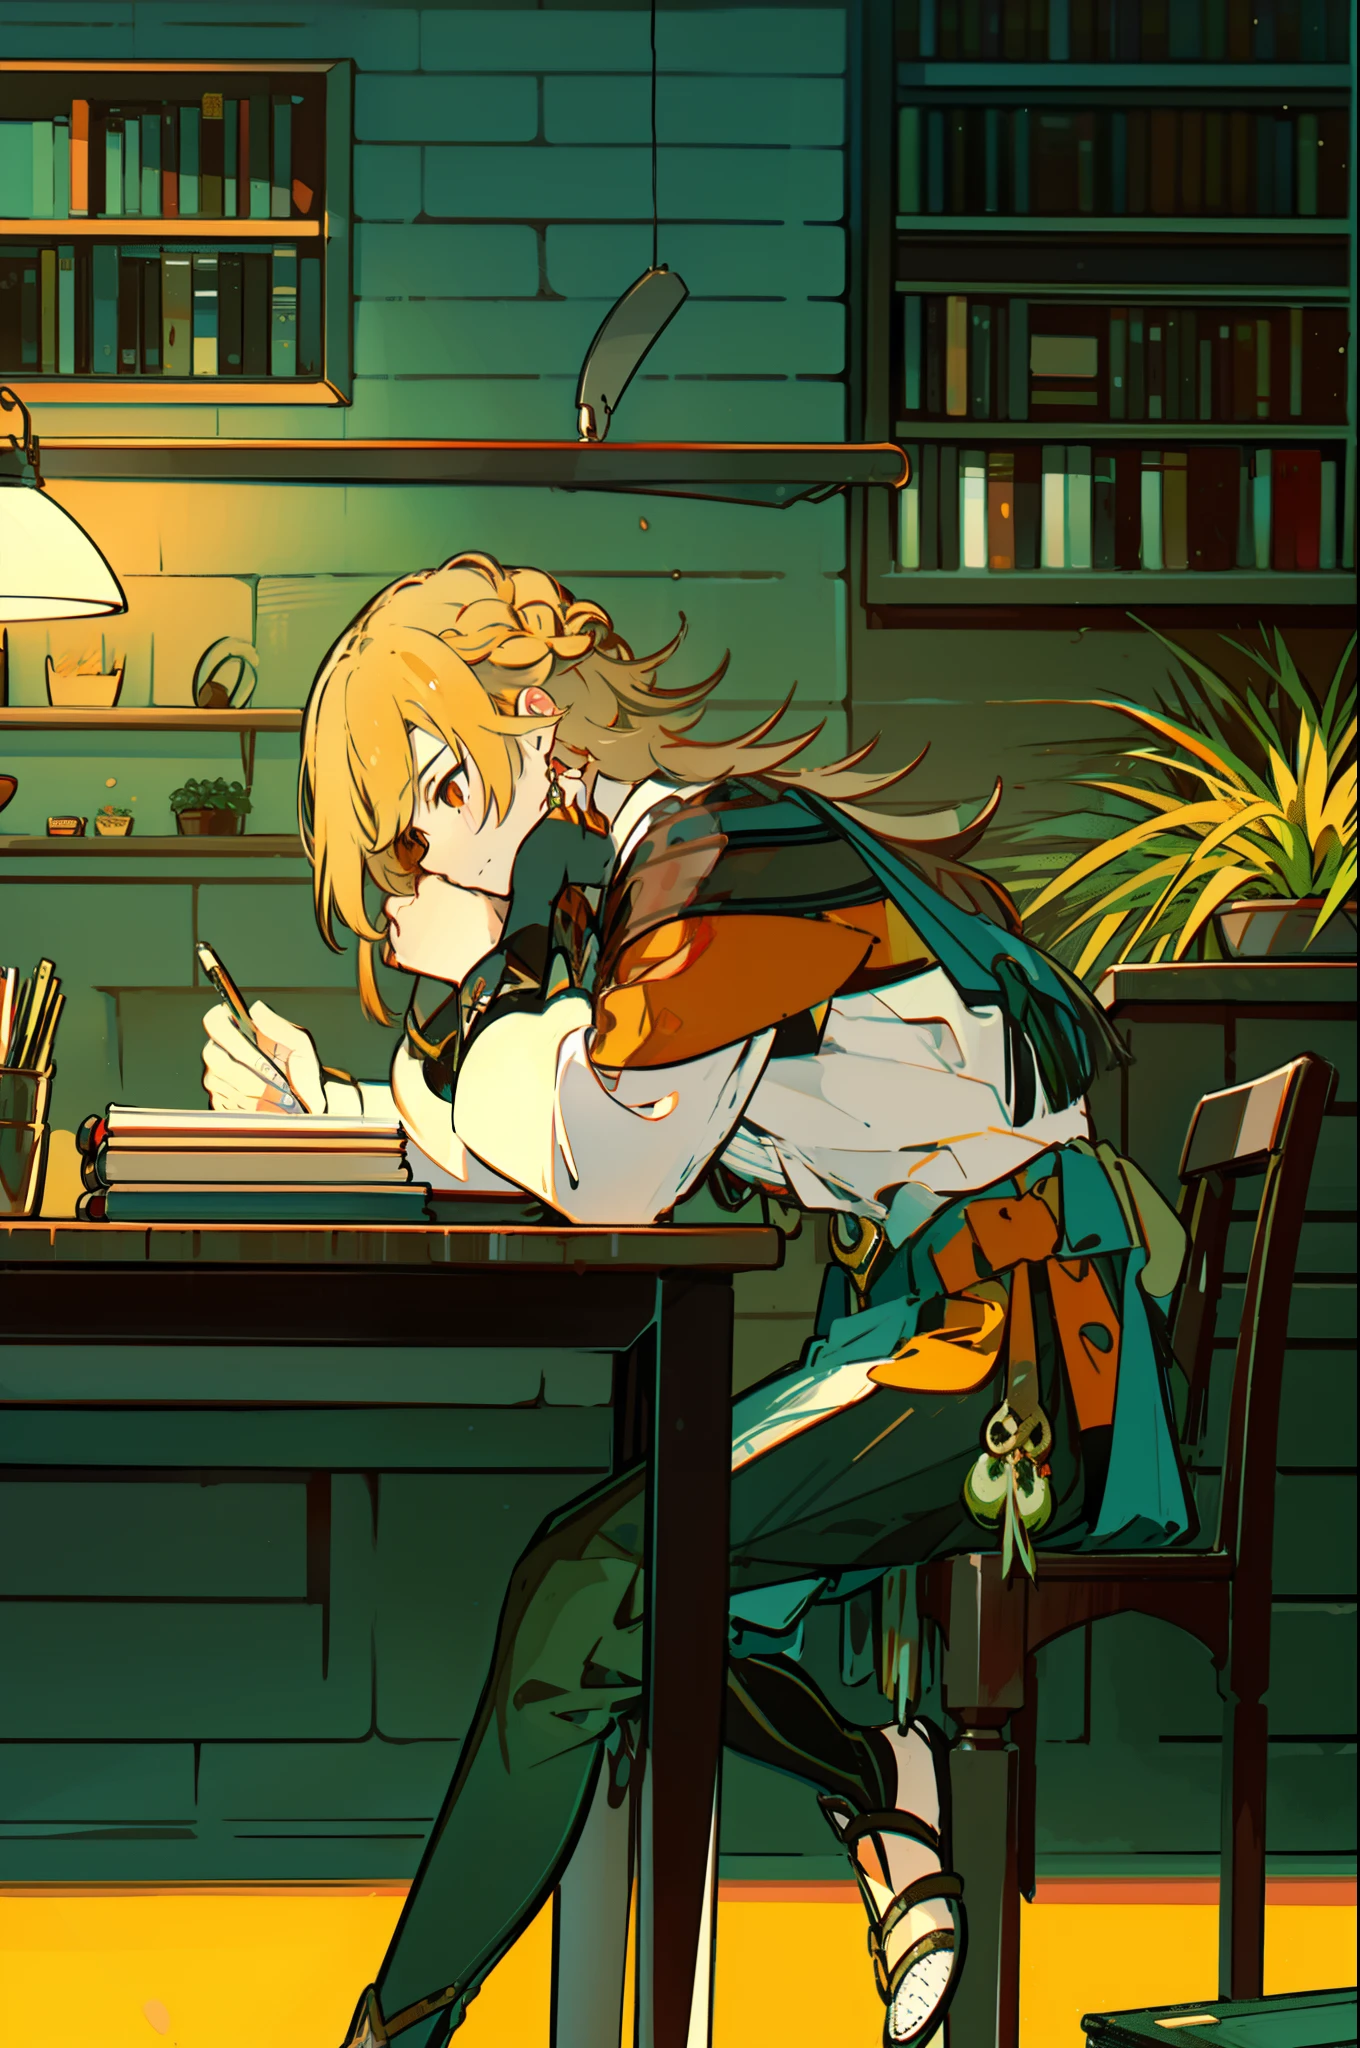 sitting at desk, 1 man, writing in a book, desk lamp, detailed environment, bookshelves in background, potted plants, scrolls, from_side, writing, lofi study, brown, red, yellow, orange, green